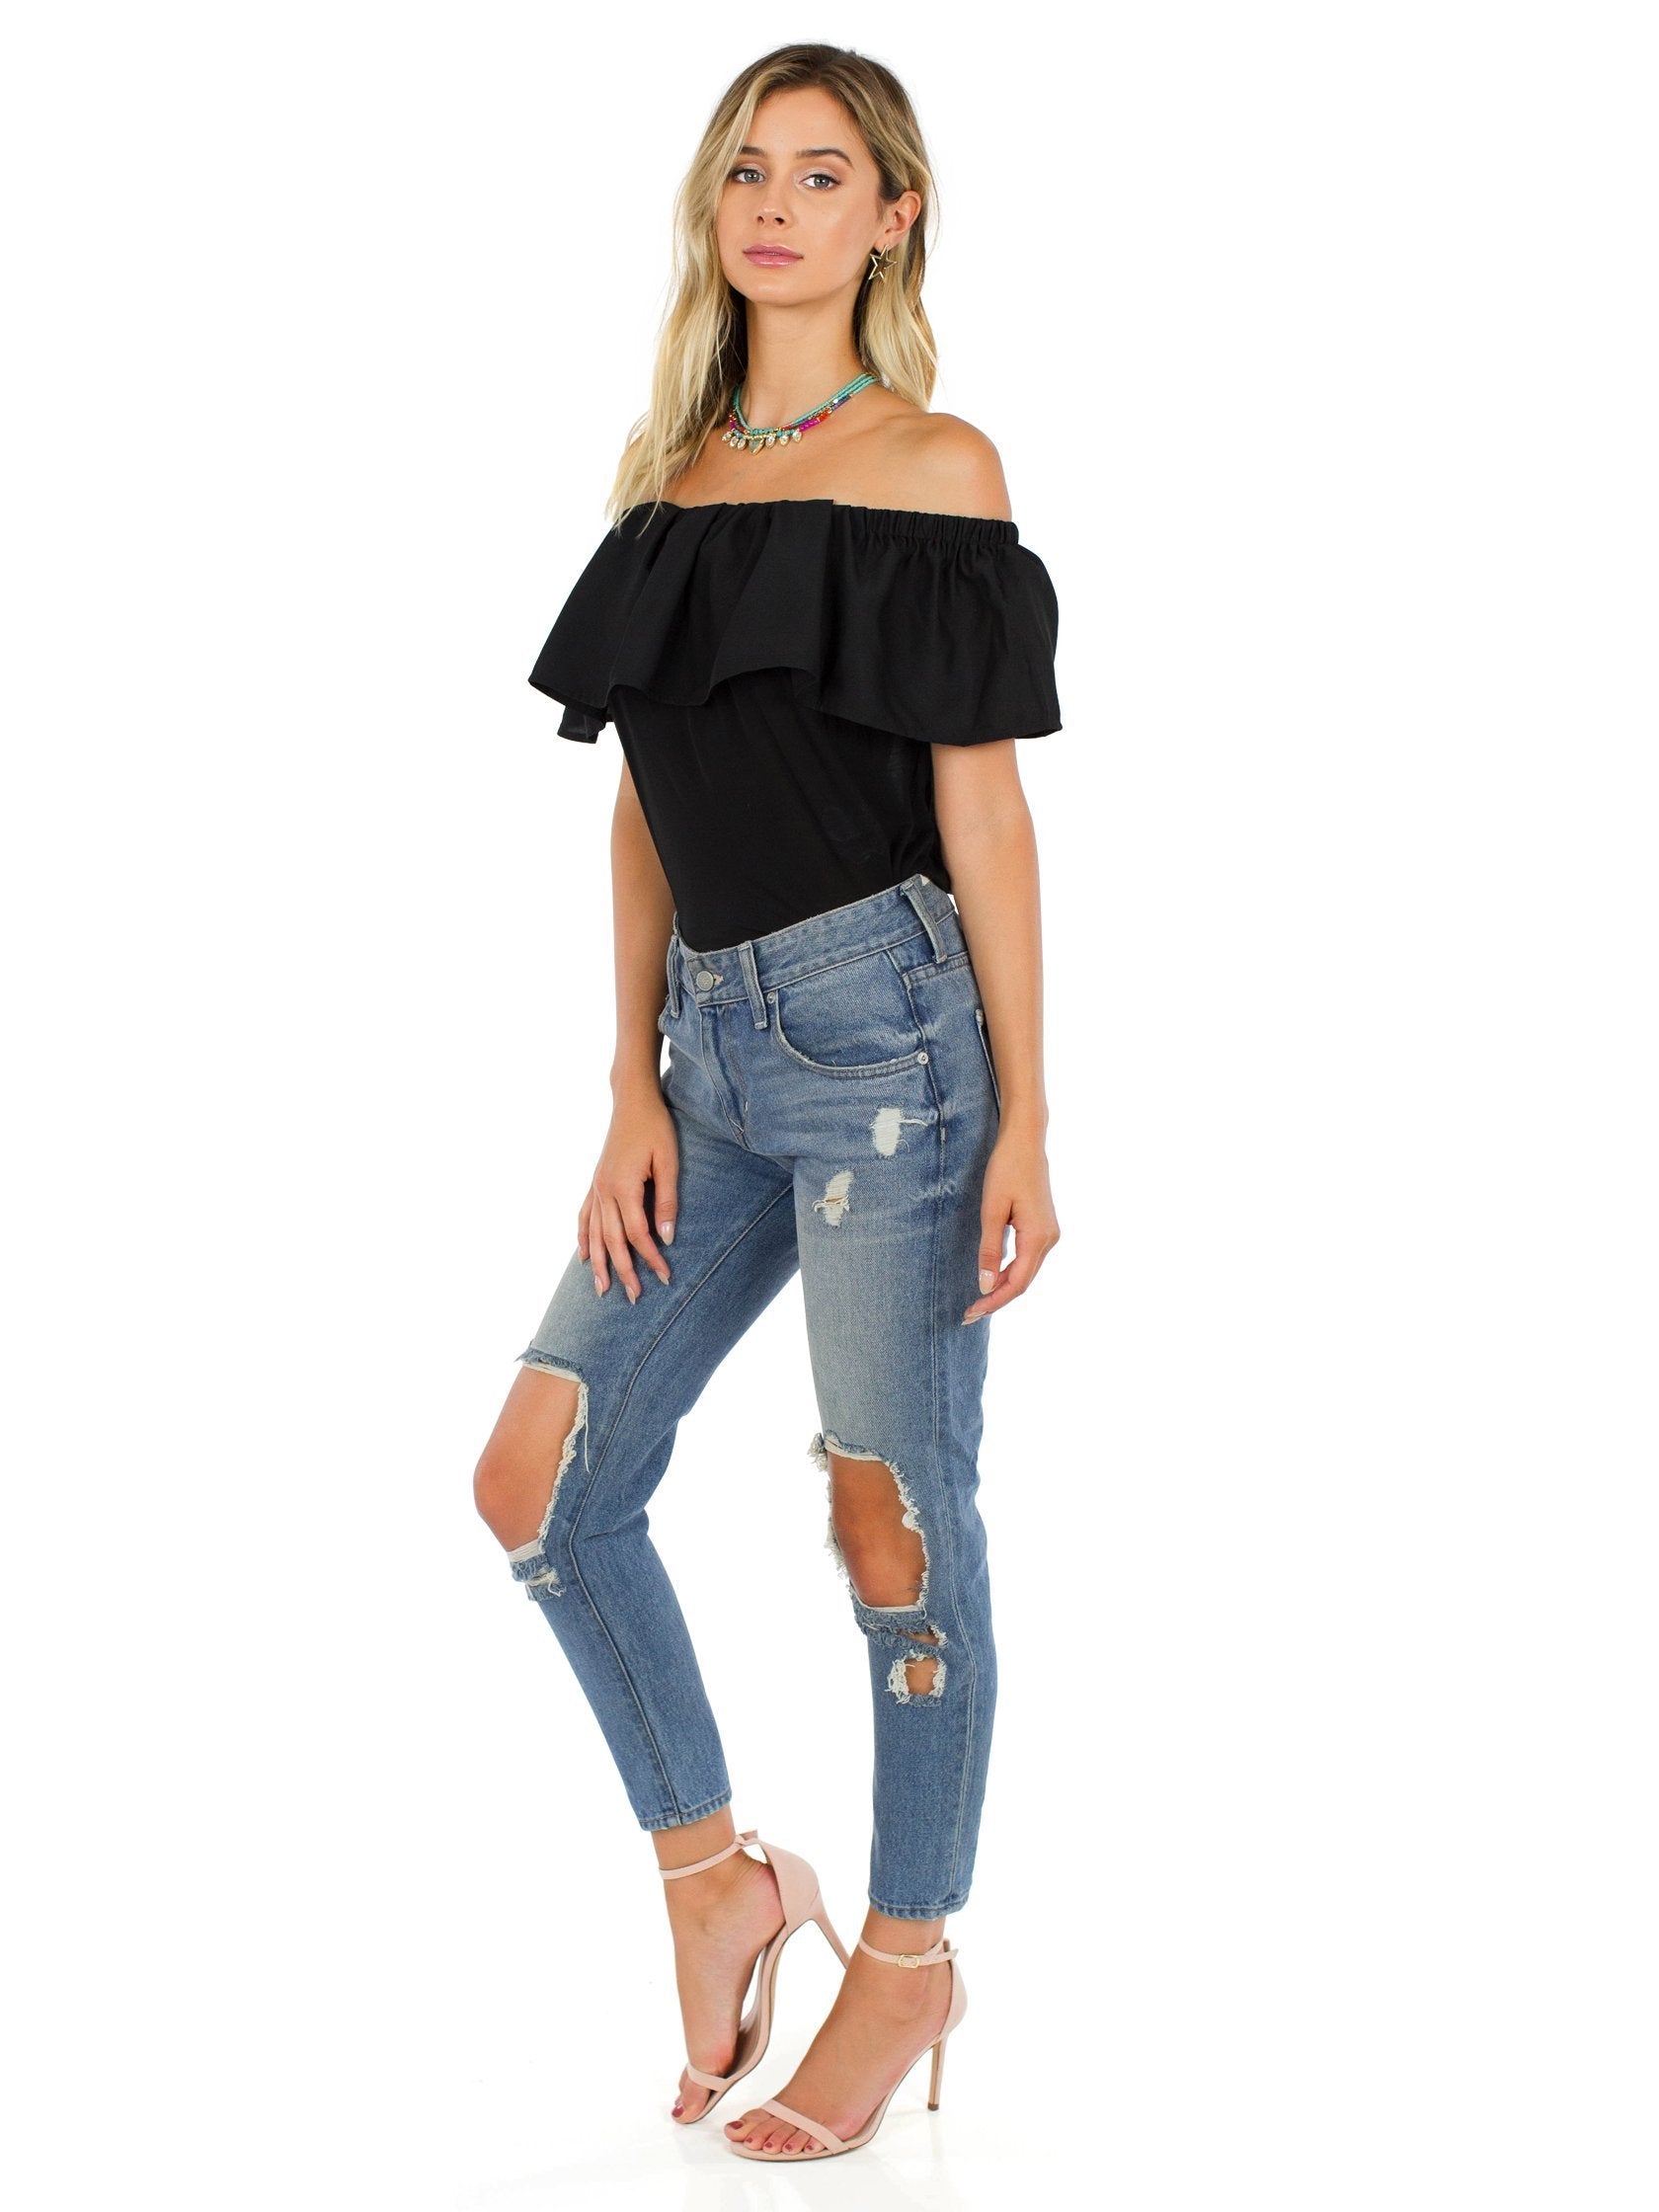 Women outfit in a top rental from French Connection called Polly Plains Off-the-shoulder Top